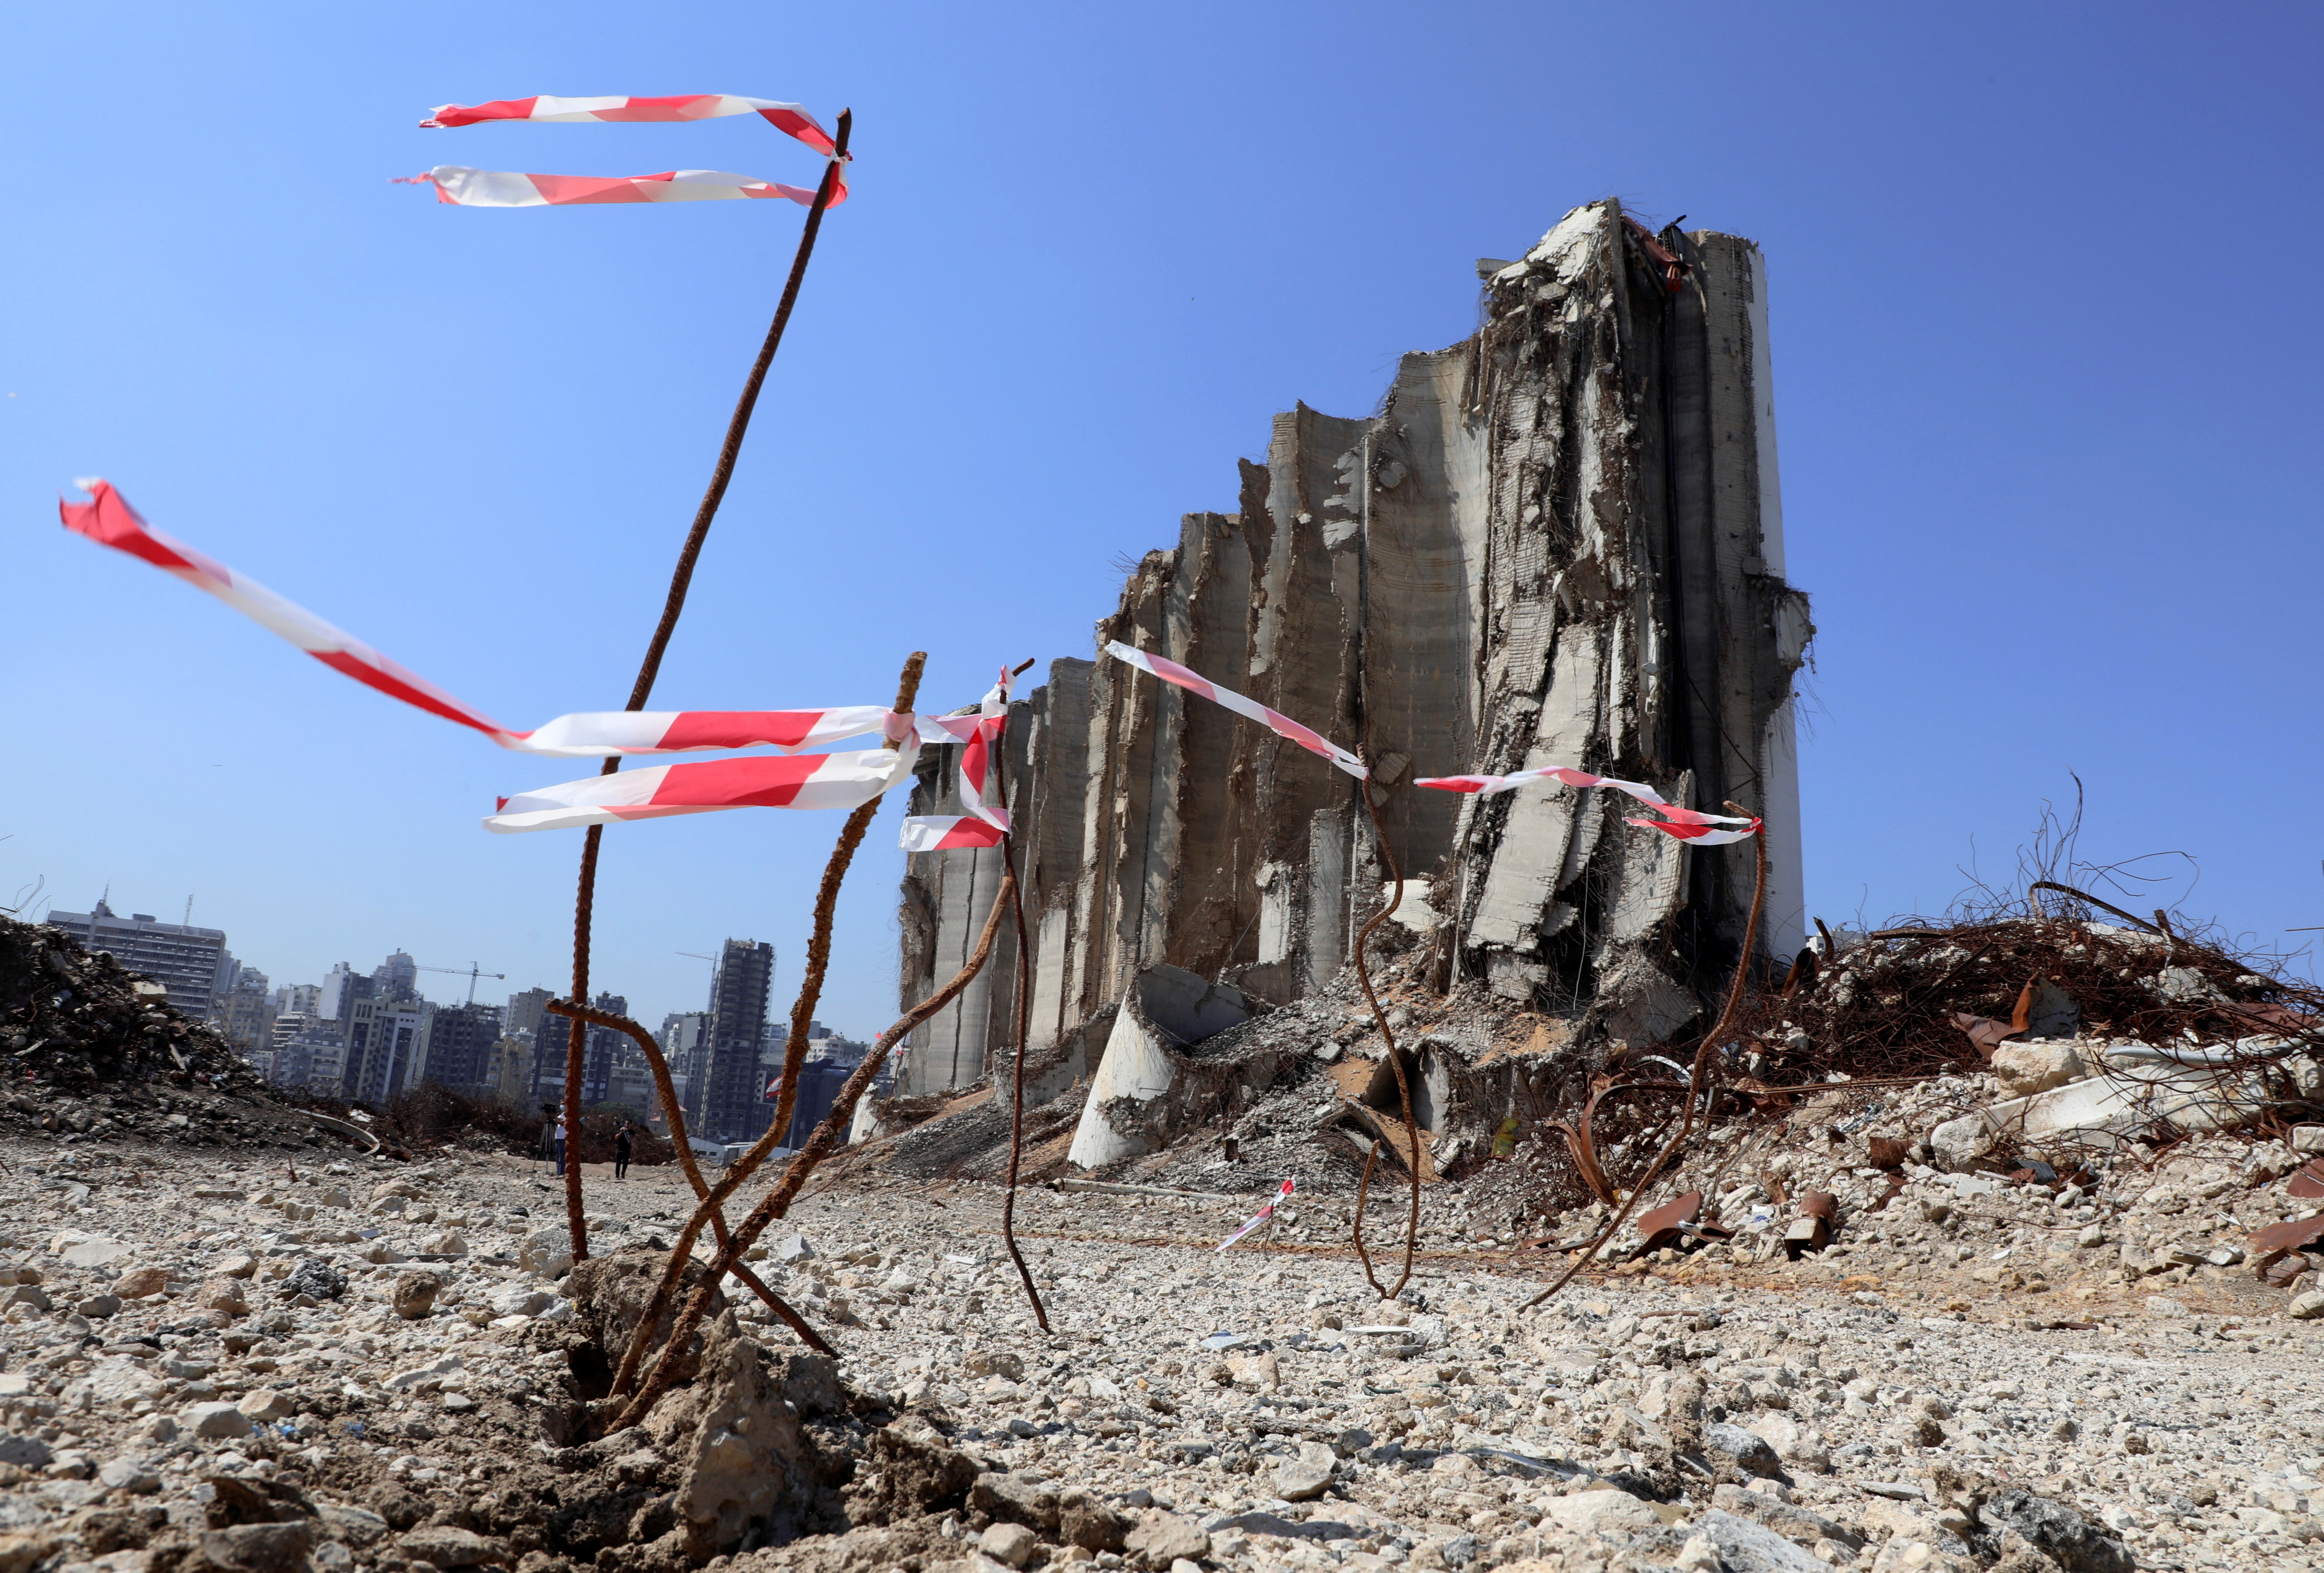 A view shows the grain silo that was damaged during last year's Beirut port blast, in Beirut